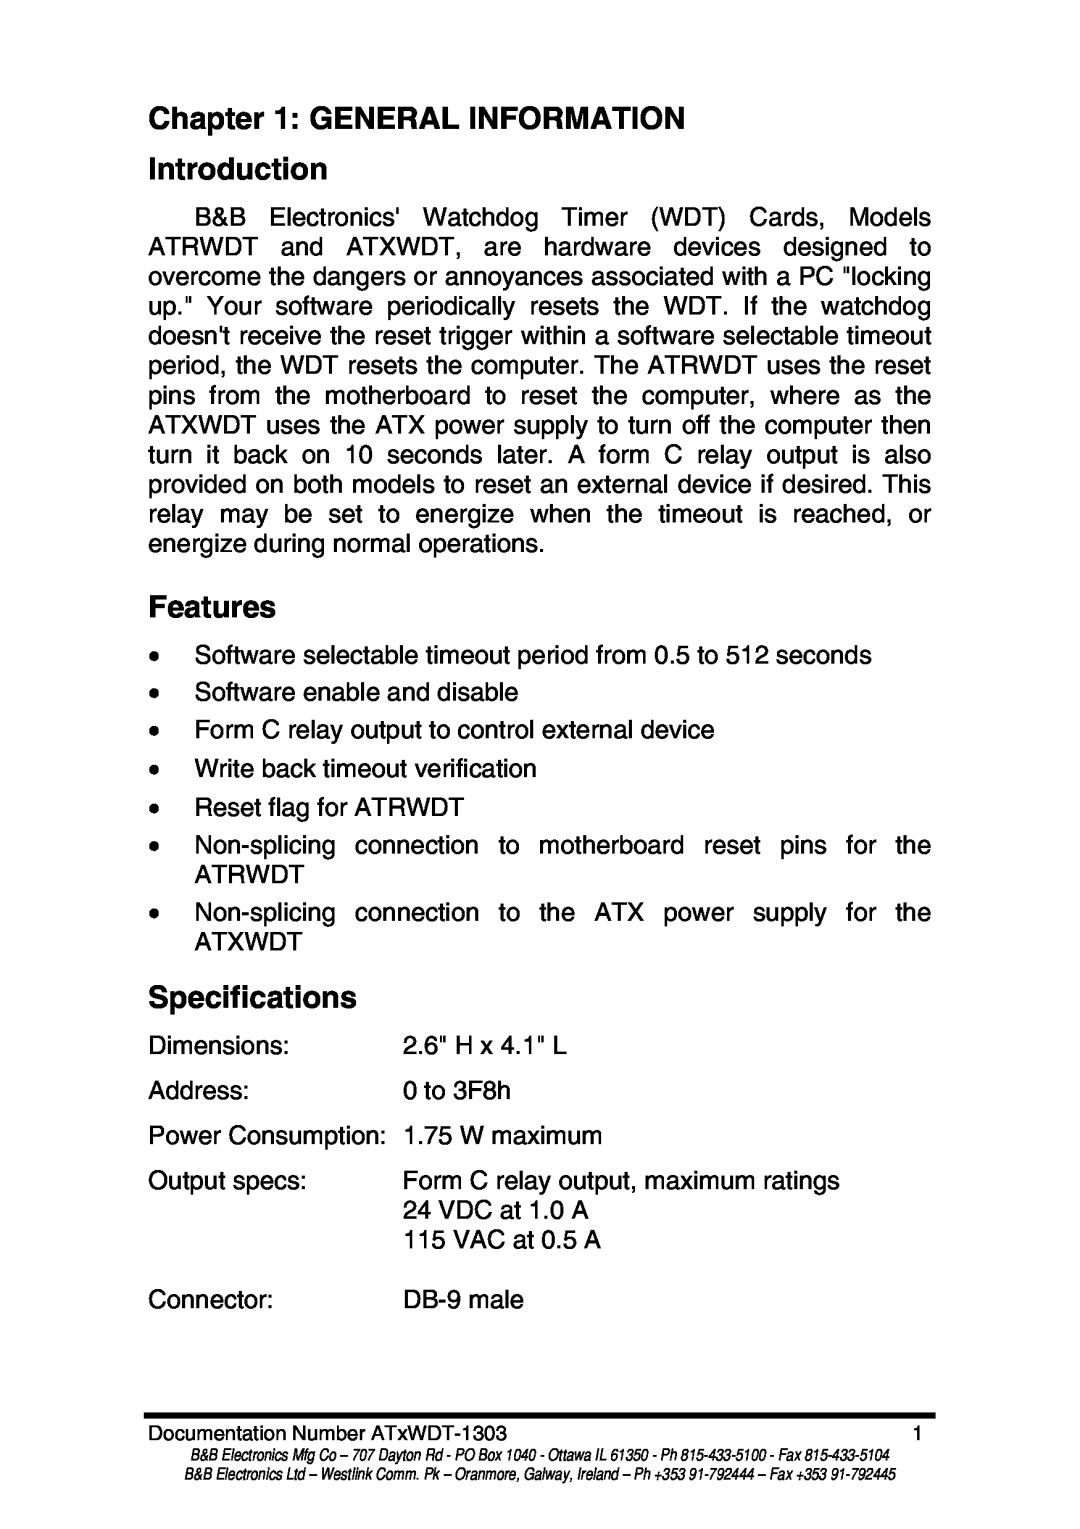 B&B Electronics ATRWDT, ATXWDT manual GENERAL INFORMATION Introduction, Features, Specifications 